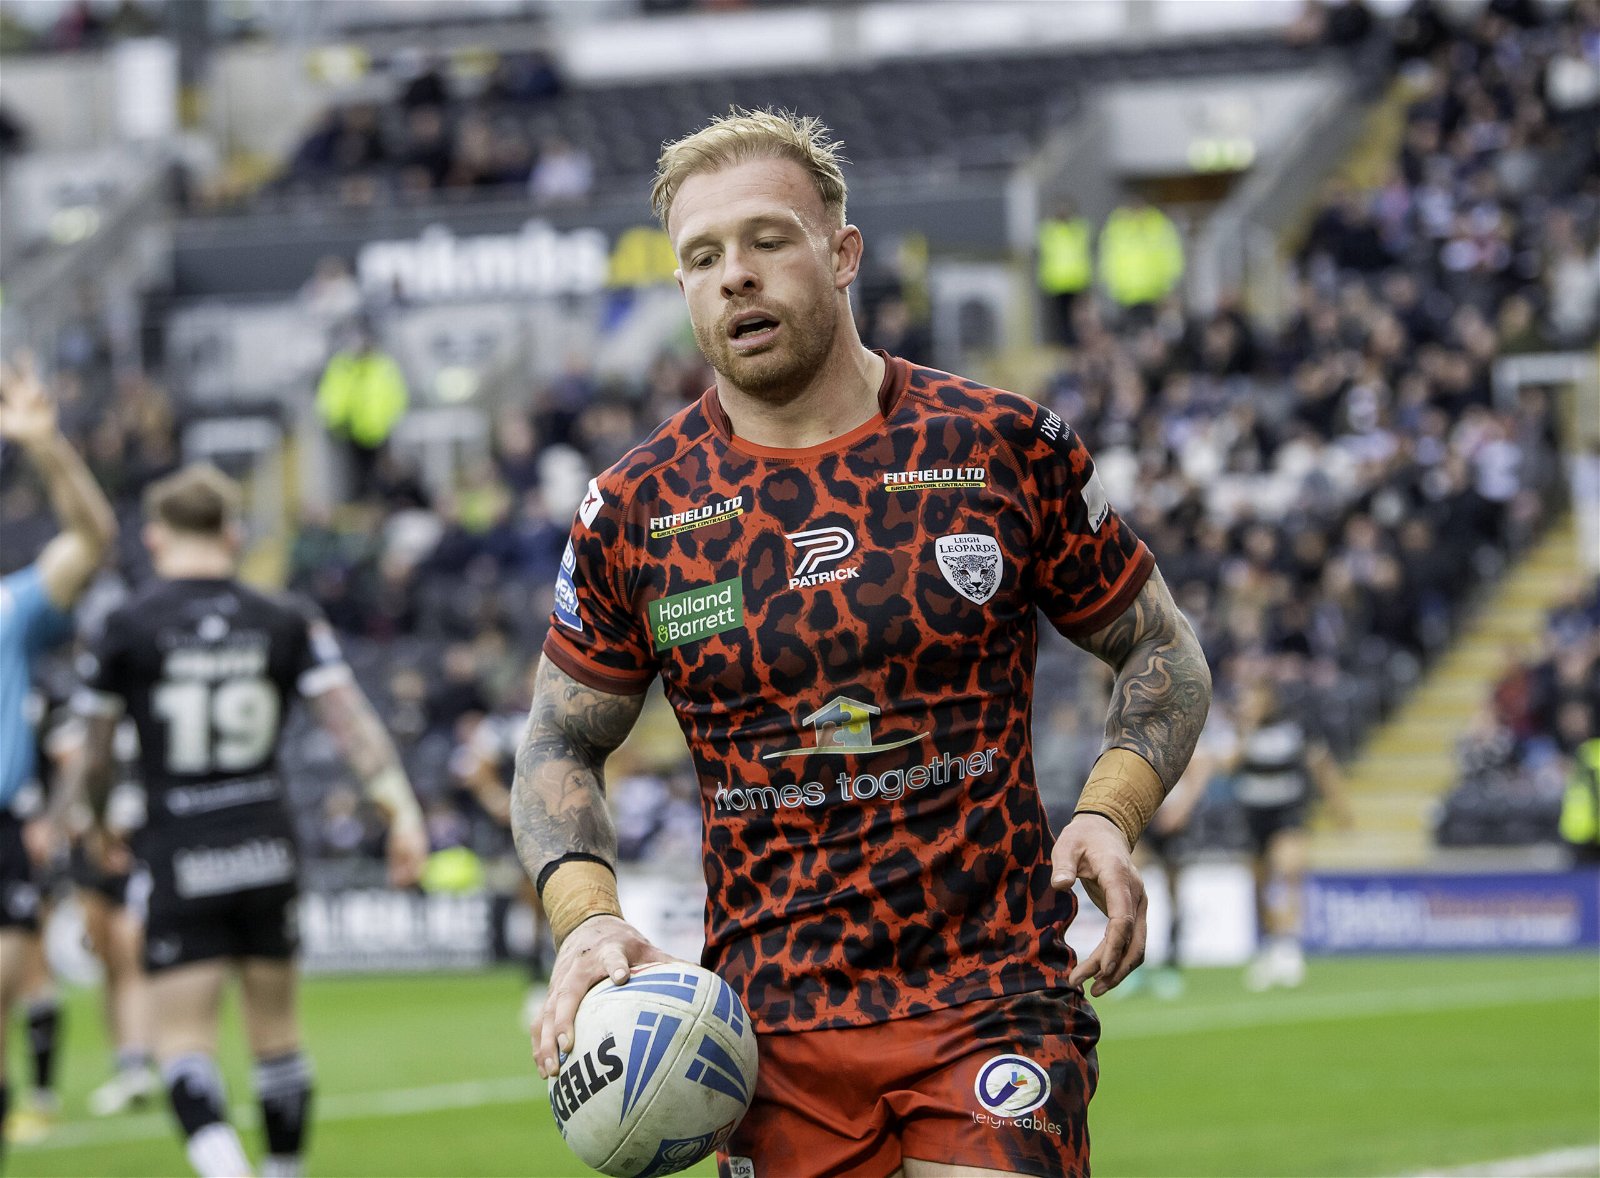 Leigh Leopards' Oli Holmes holds the ball having just scored a try.The shirt is red with black leopard print. Holland and Barrett, Fitfield Ltd and Homes Together logos can be seen (just about)!